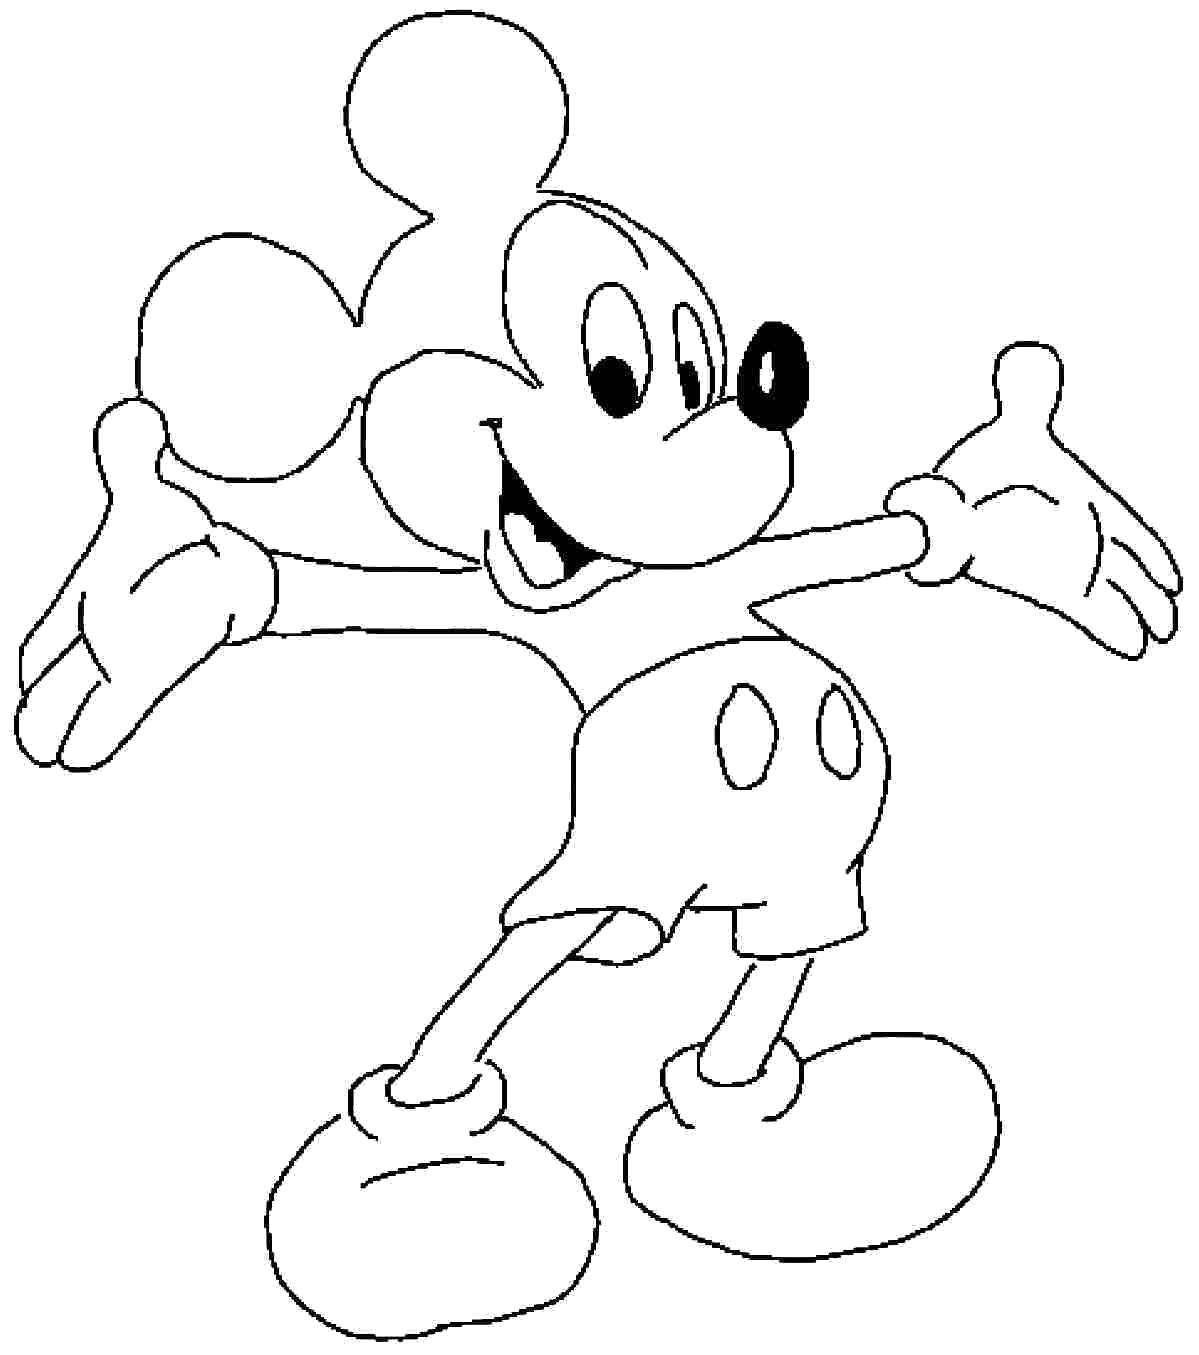 Coloring Mickey mouse. Category Disney cartoons. Tags:  Cartoon character, Mickey mouse.